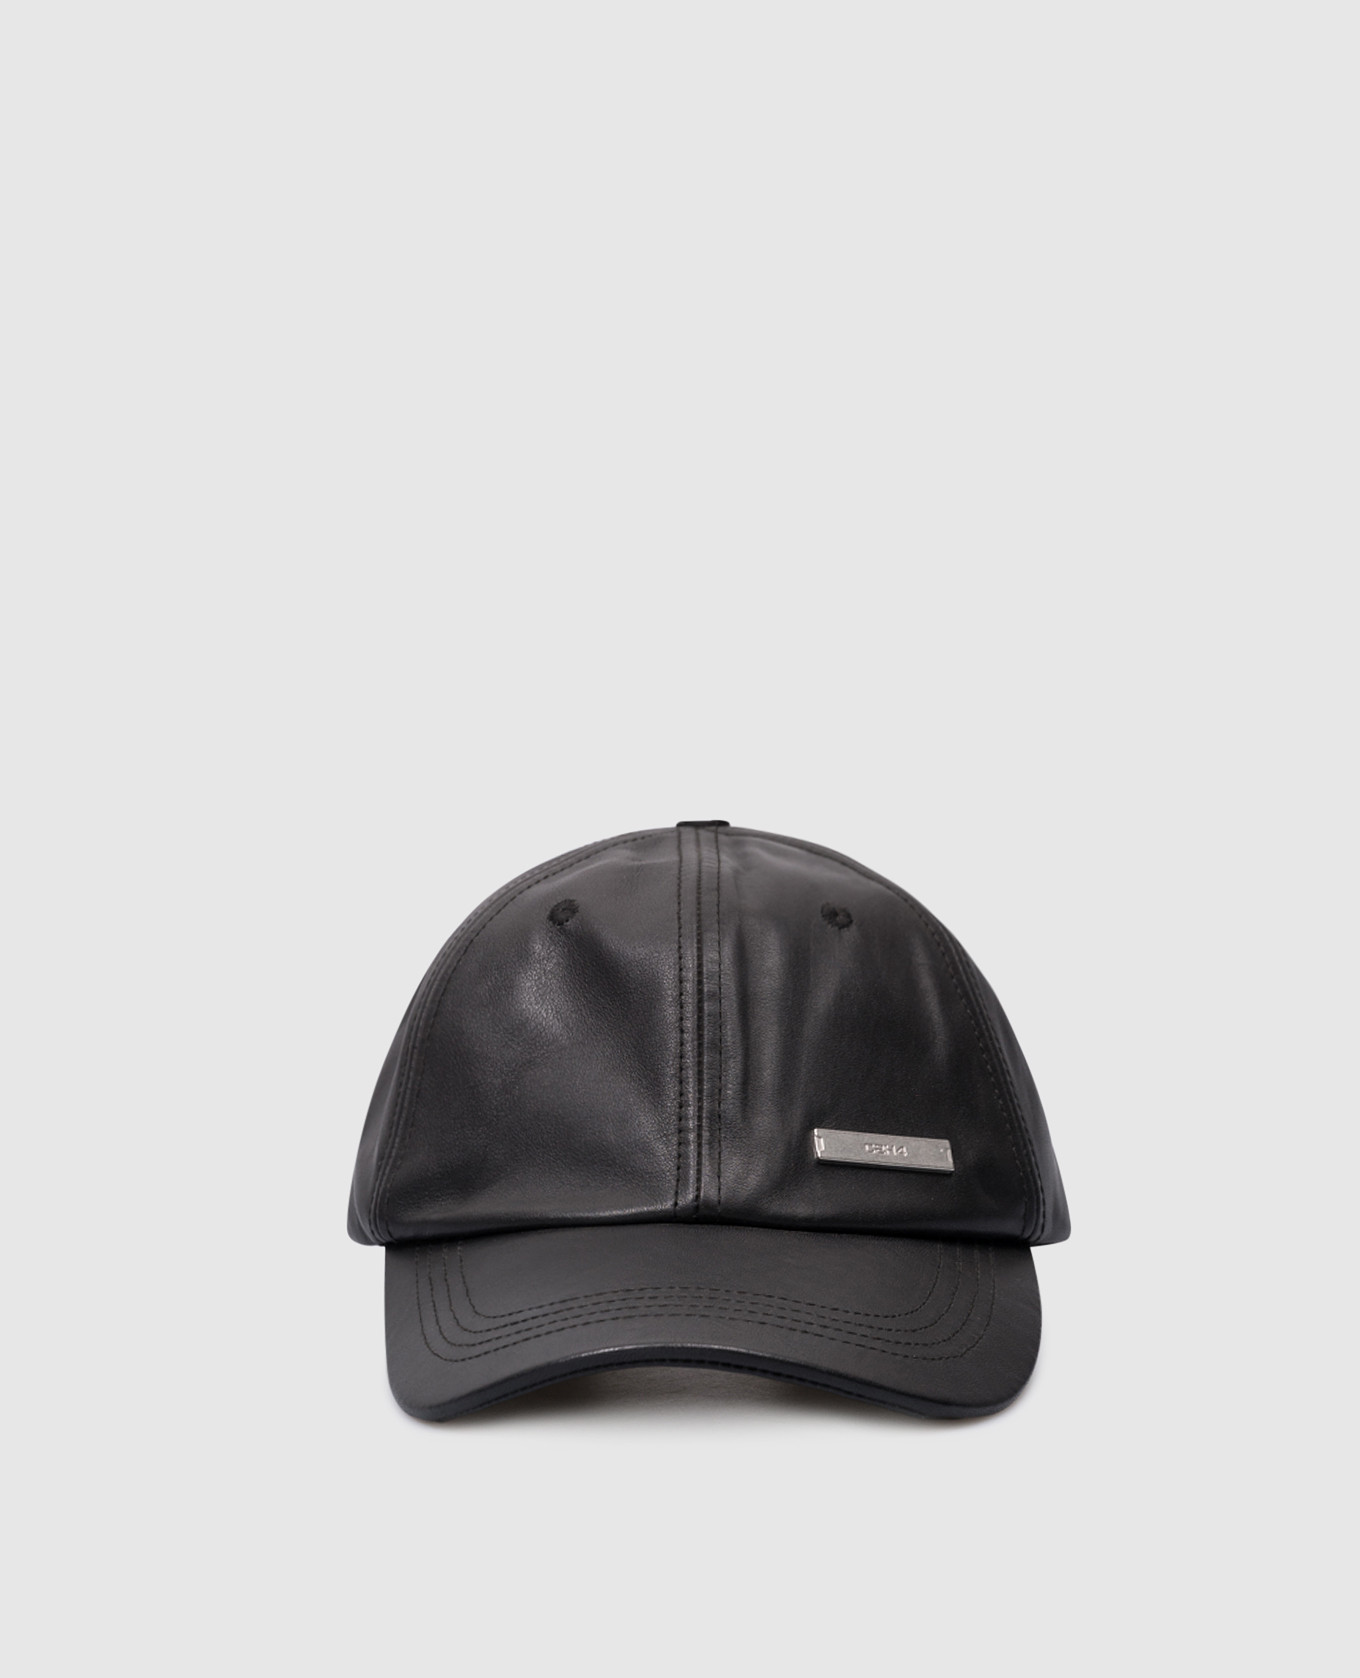 Black leather cap with logo